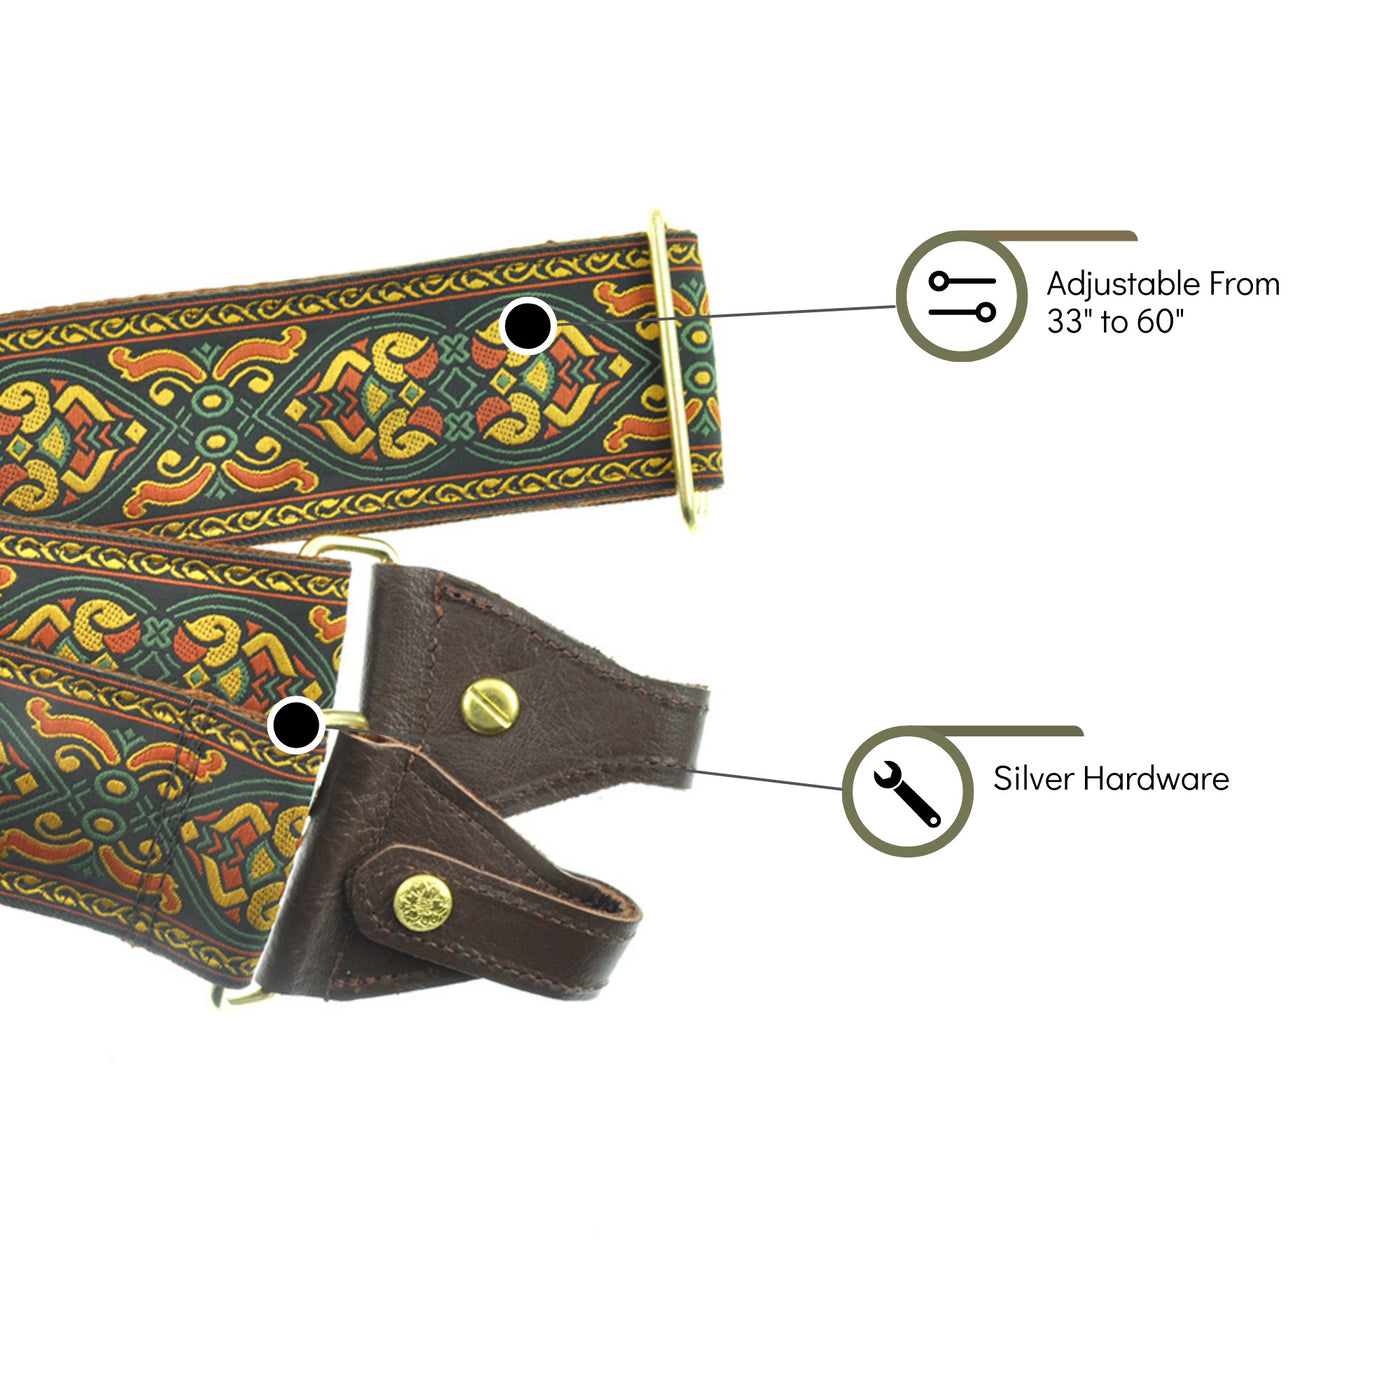 Souldier BJC0251NM05WB - Handmade Souldier Fabric Banjo Strap, 2 Inches Wide and Adjustable from 33" to 60" Made in the USA, Braveheart